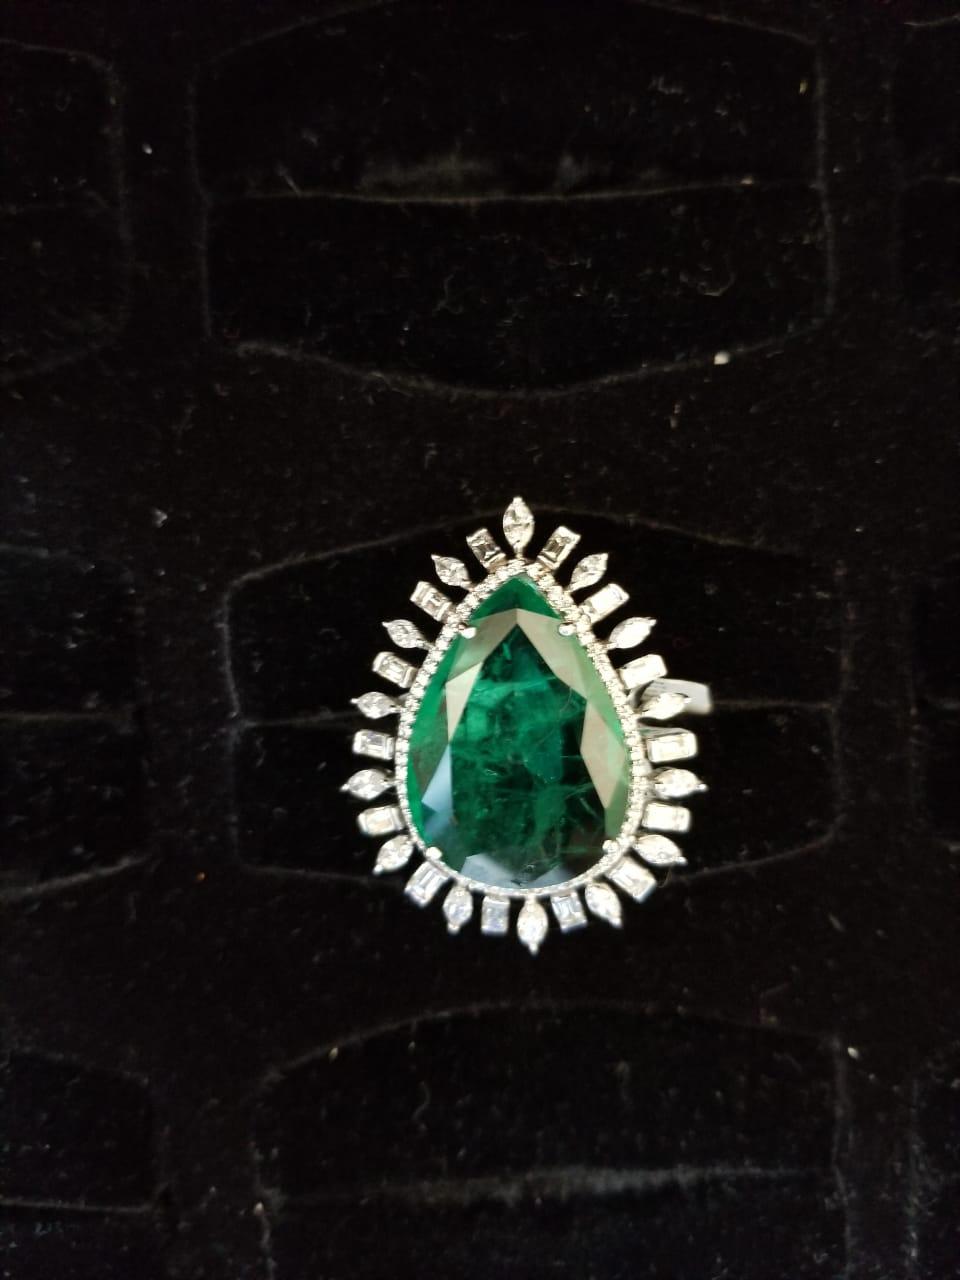 A classic Zambian Emerald and Diamond Cocktail ring set in 18K Gold. The weight of the Zambian Emerald is 18.74 carats and originates from Zambia. The Emerald is without any treatment and completely natural. The combined weight of the Marquise and